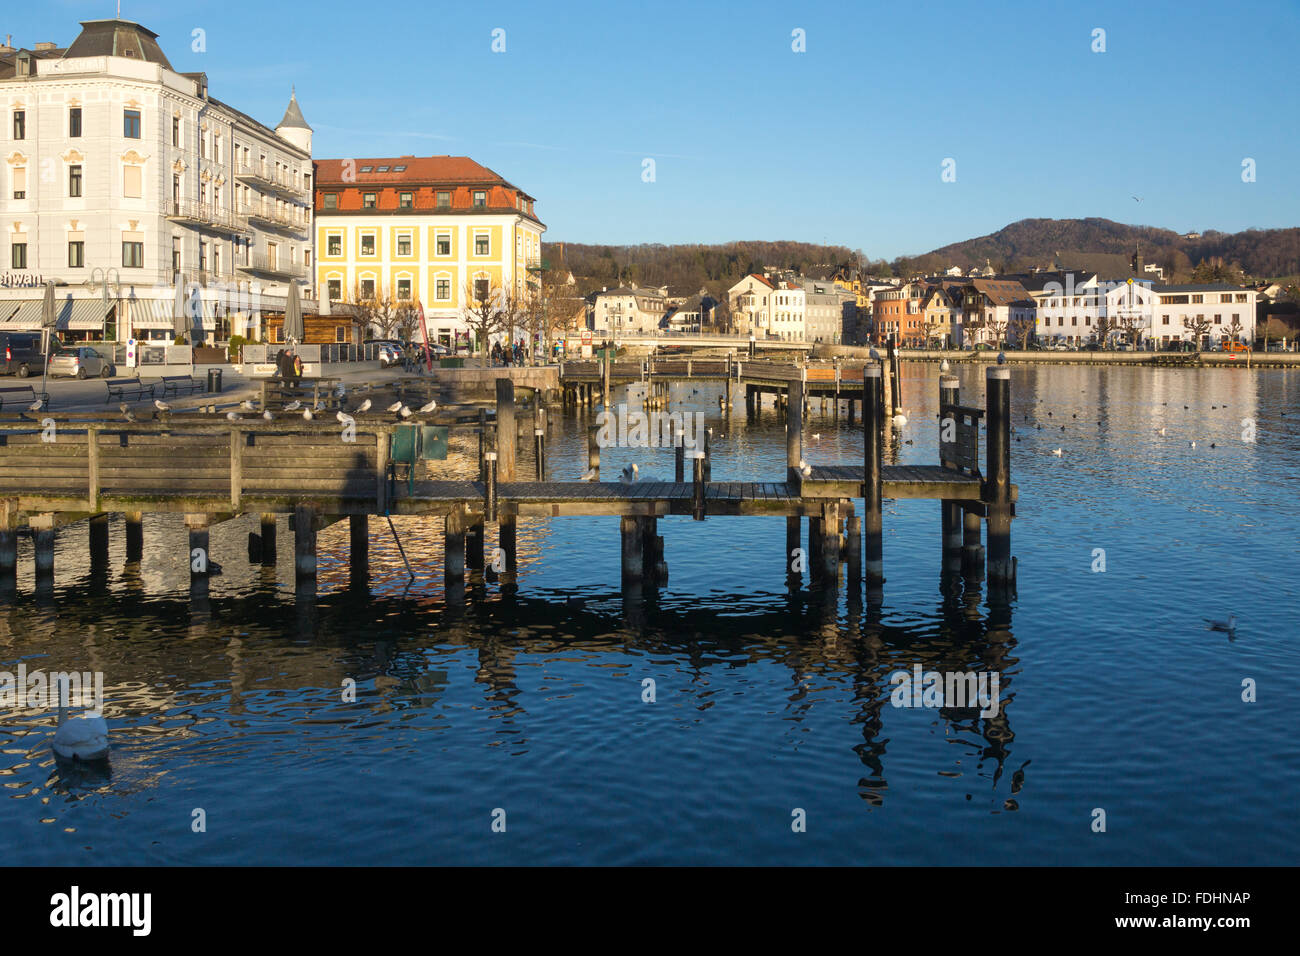 A view of the jetties and people walking in the winter sunshine in Gmunden, Upper Austria Stock Photo